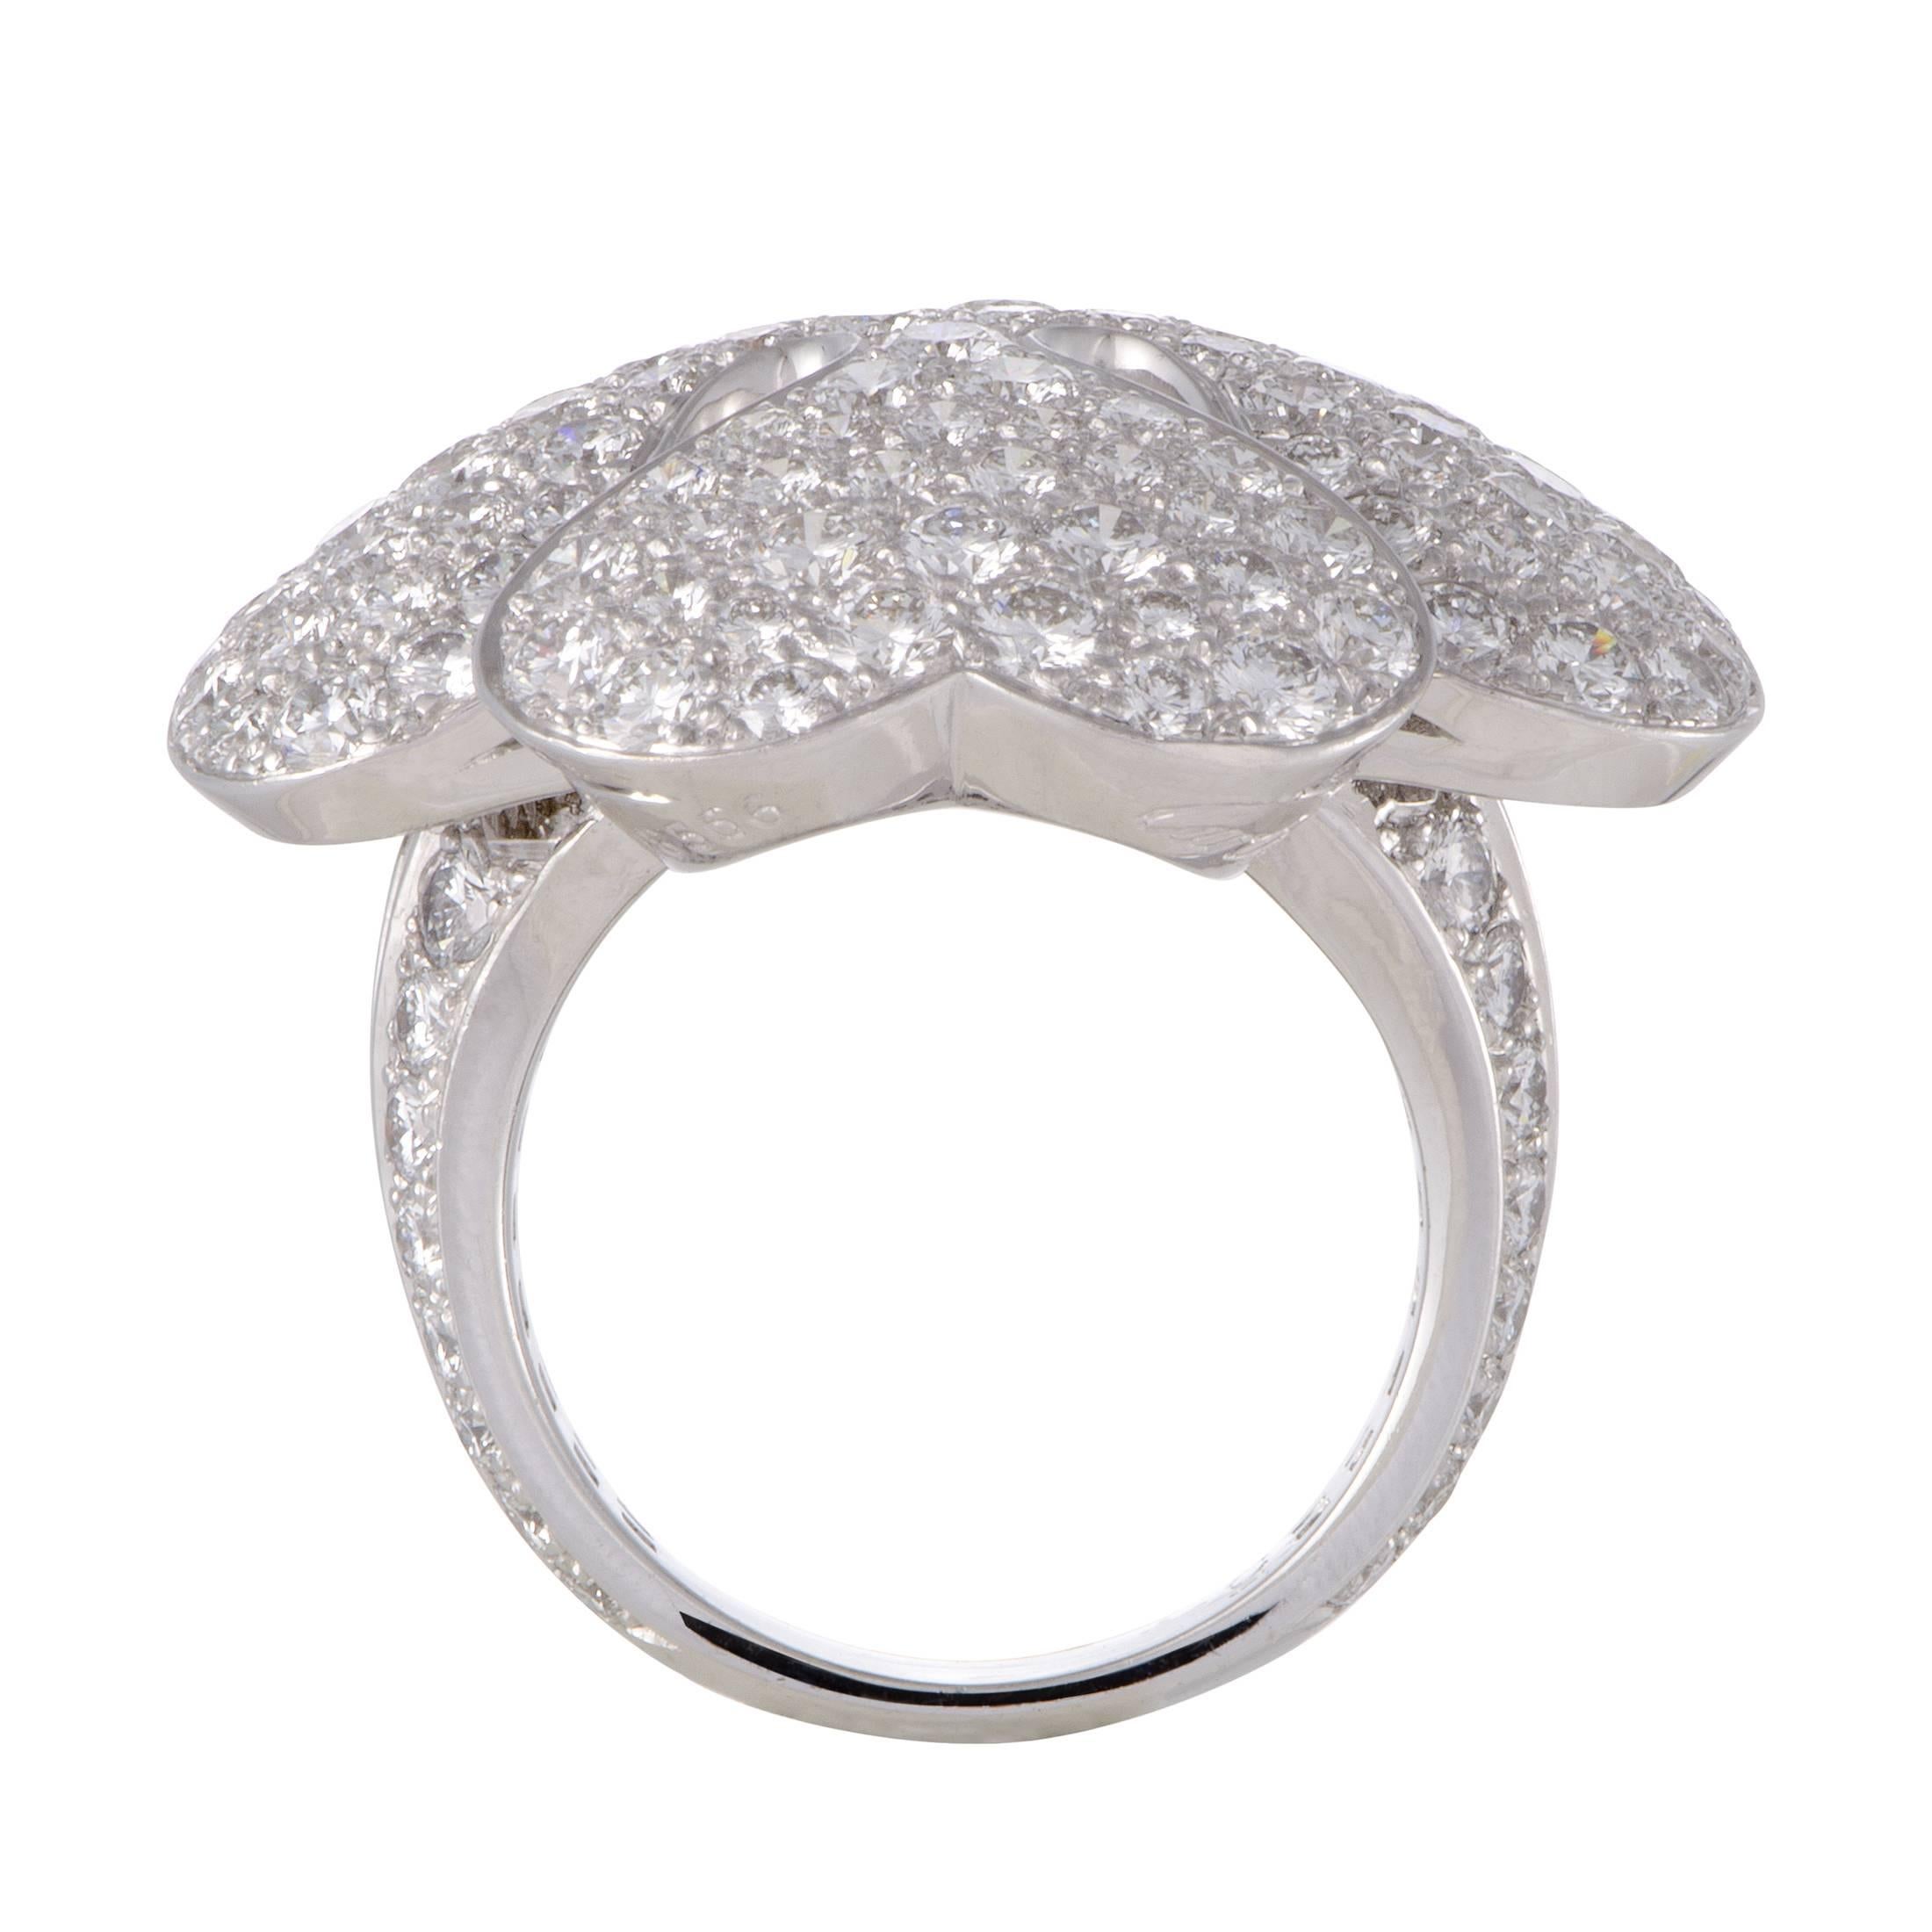 Mesmerizing, harmonious and simply stunning, this exceptionally lavish ring from Cartier is a limited edition item that depicts a marvelous four-leaf clover motif in a precious blend of shimmering 18K white gold and sparkling diamonds totaling 10.00